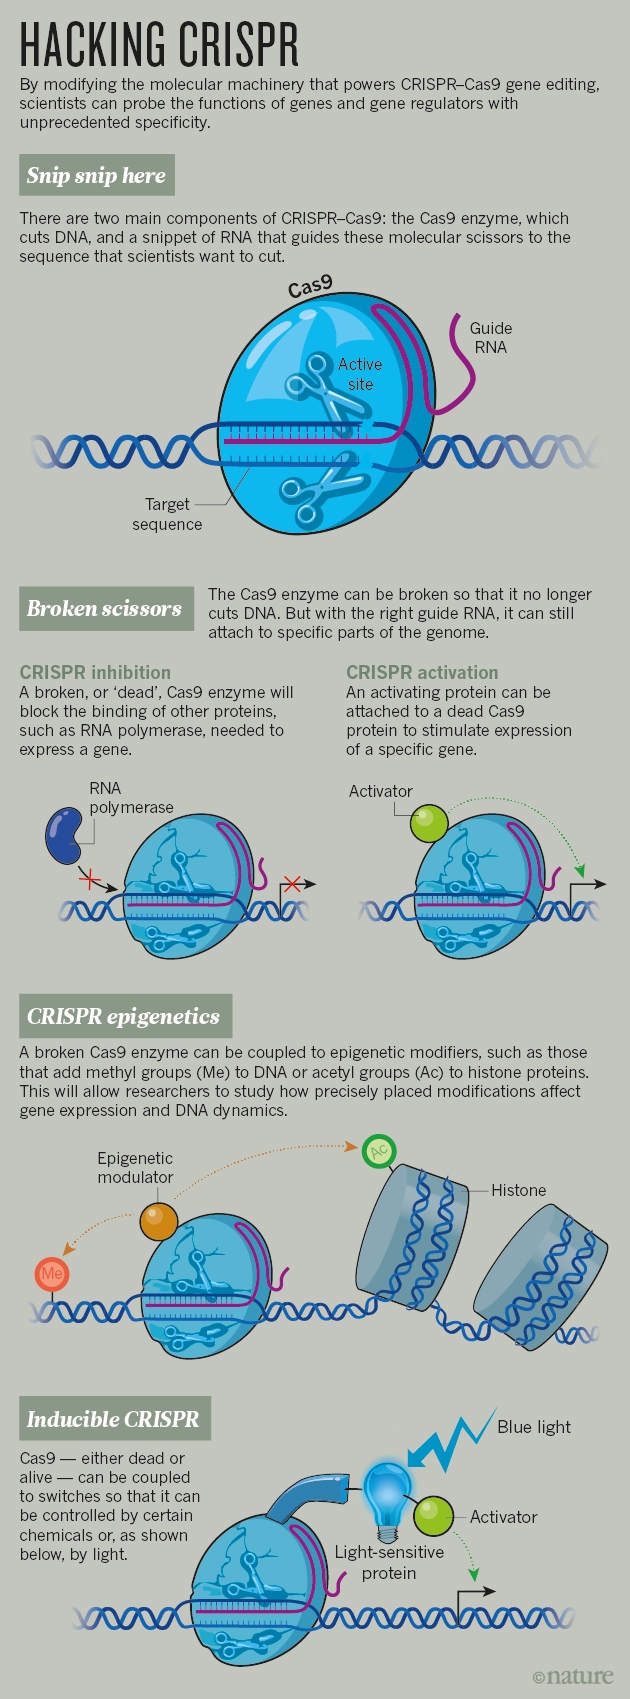 Crispr Gene Editing Is Just The Beginning Nature News Comment